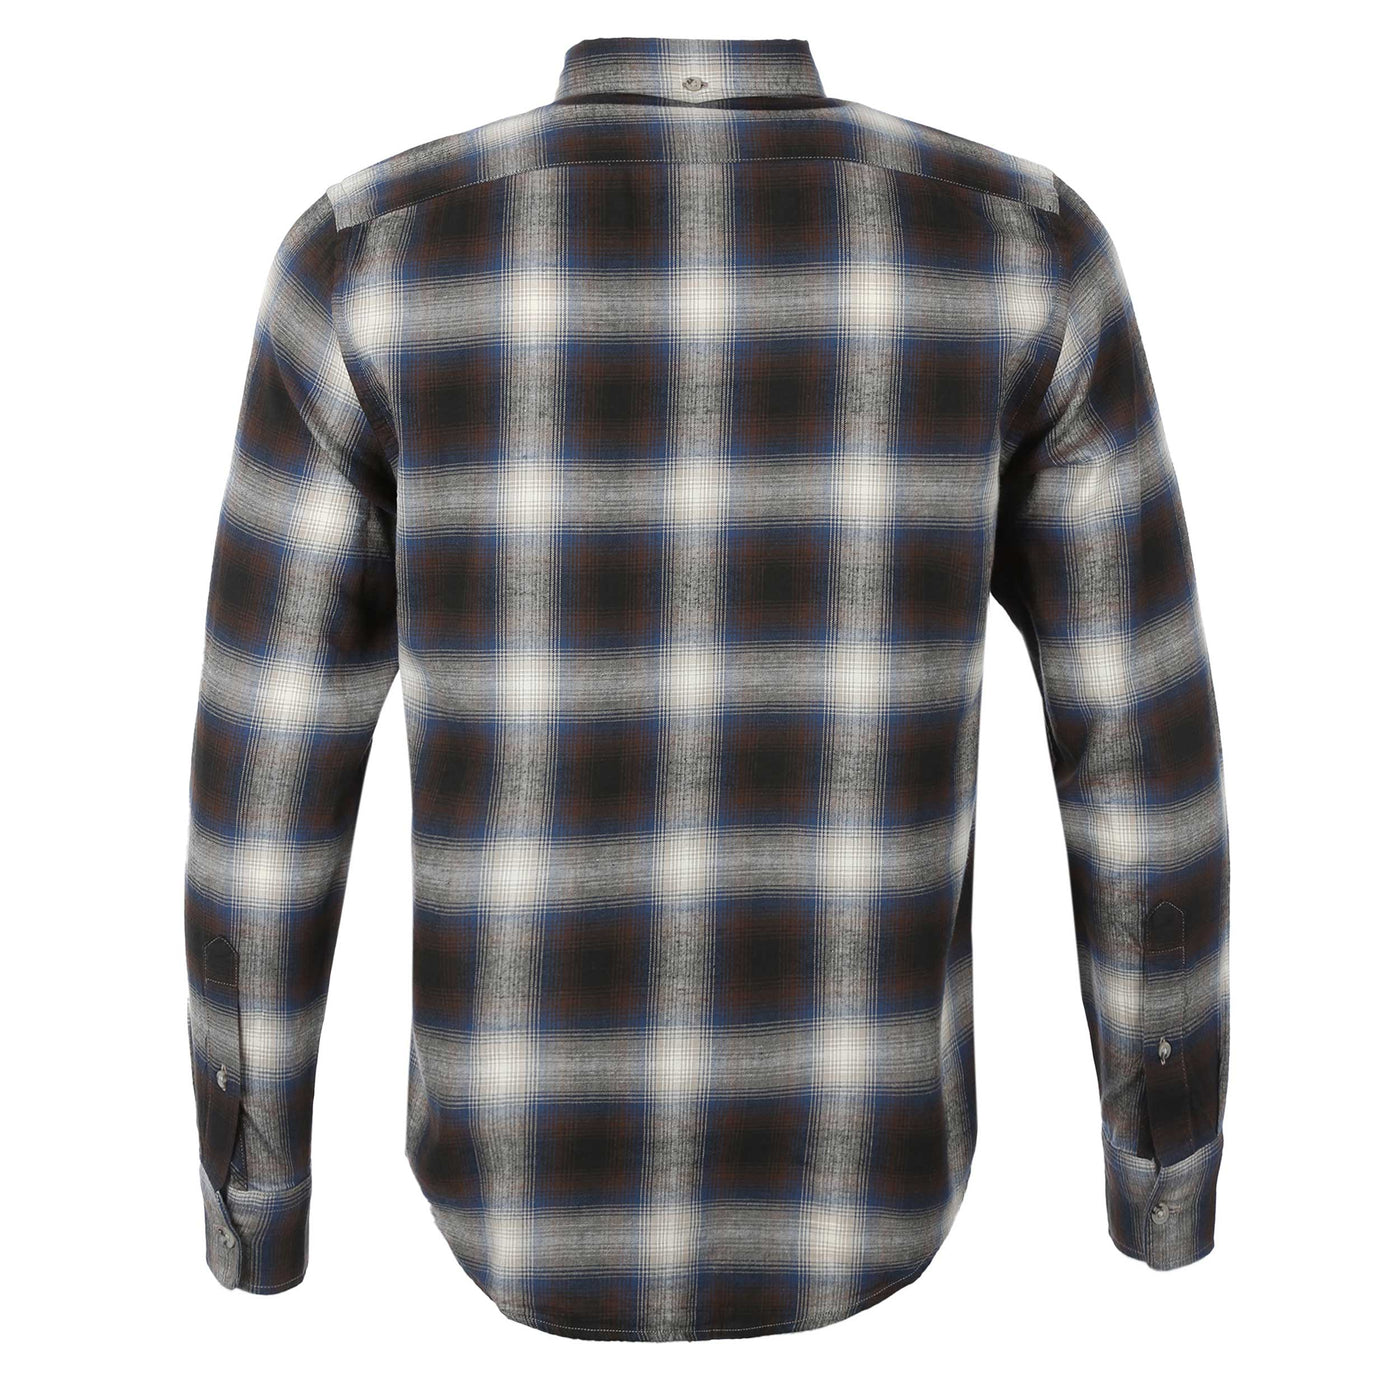 Woolrich Light Flannel Check Shirt in Grey Check Back